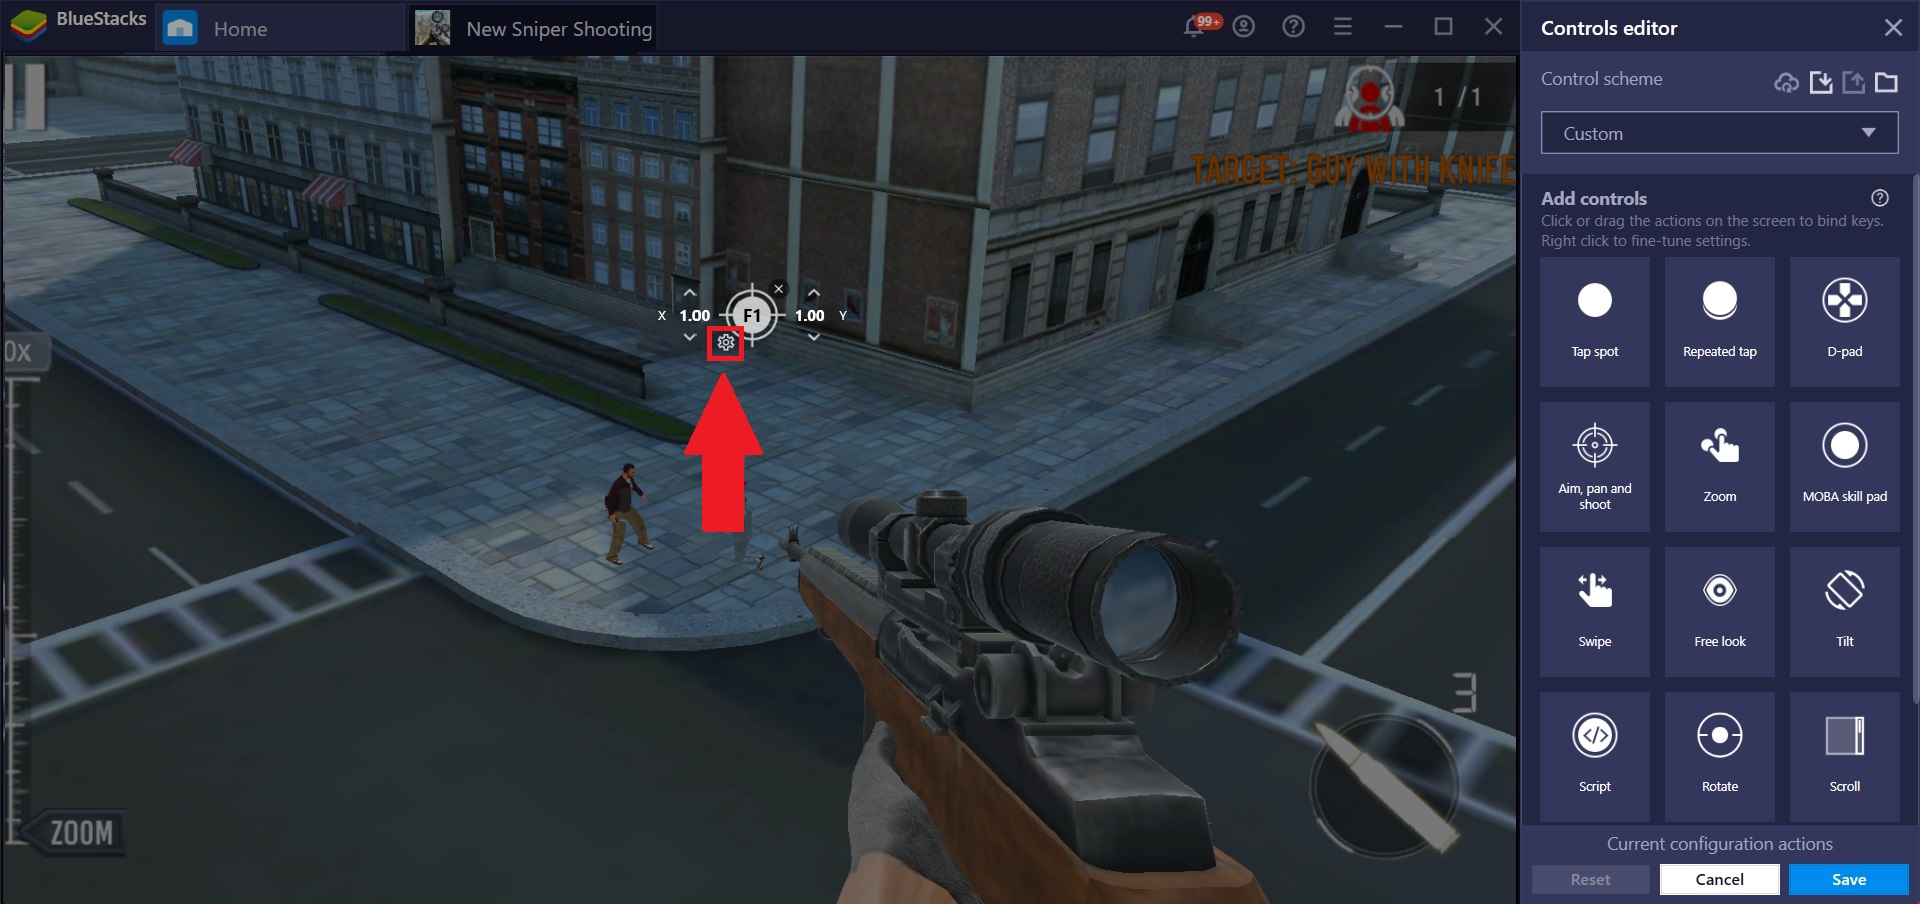 How To Use The Shooting Mode On Bluestacks 4 Bluestacks Support - right click to aim with gun roblox